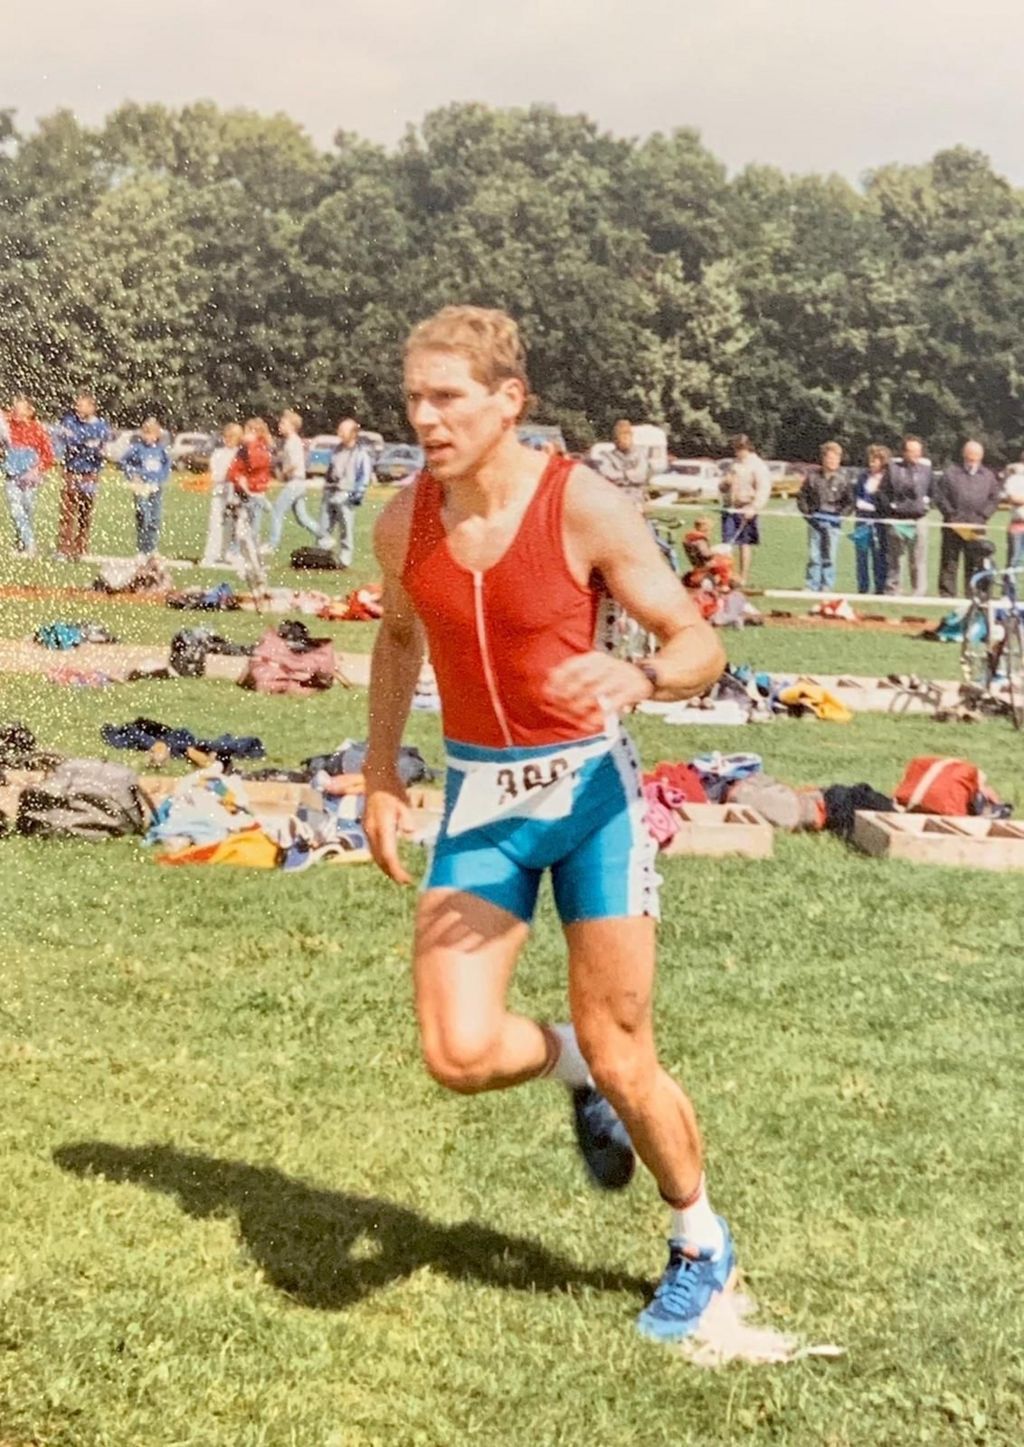 Photo of Stephen running in shorts and a vest before he contracted hepatitis C